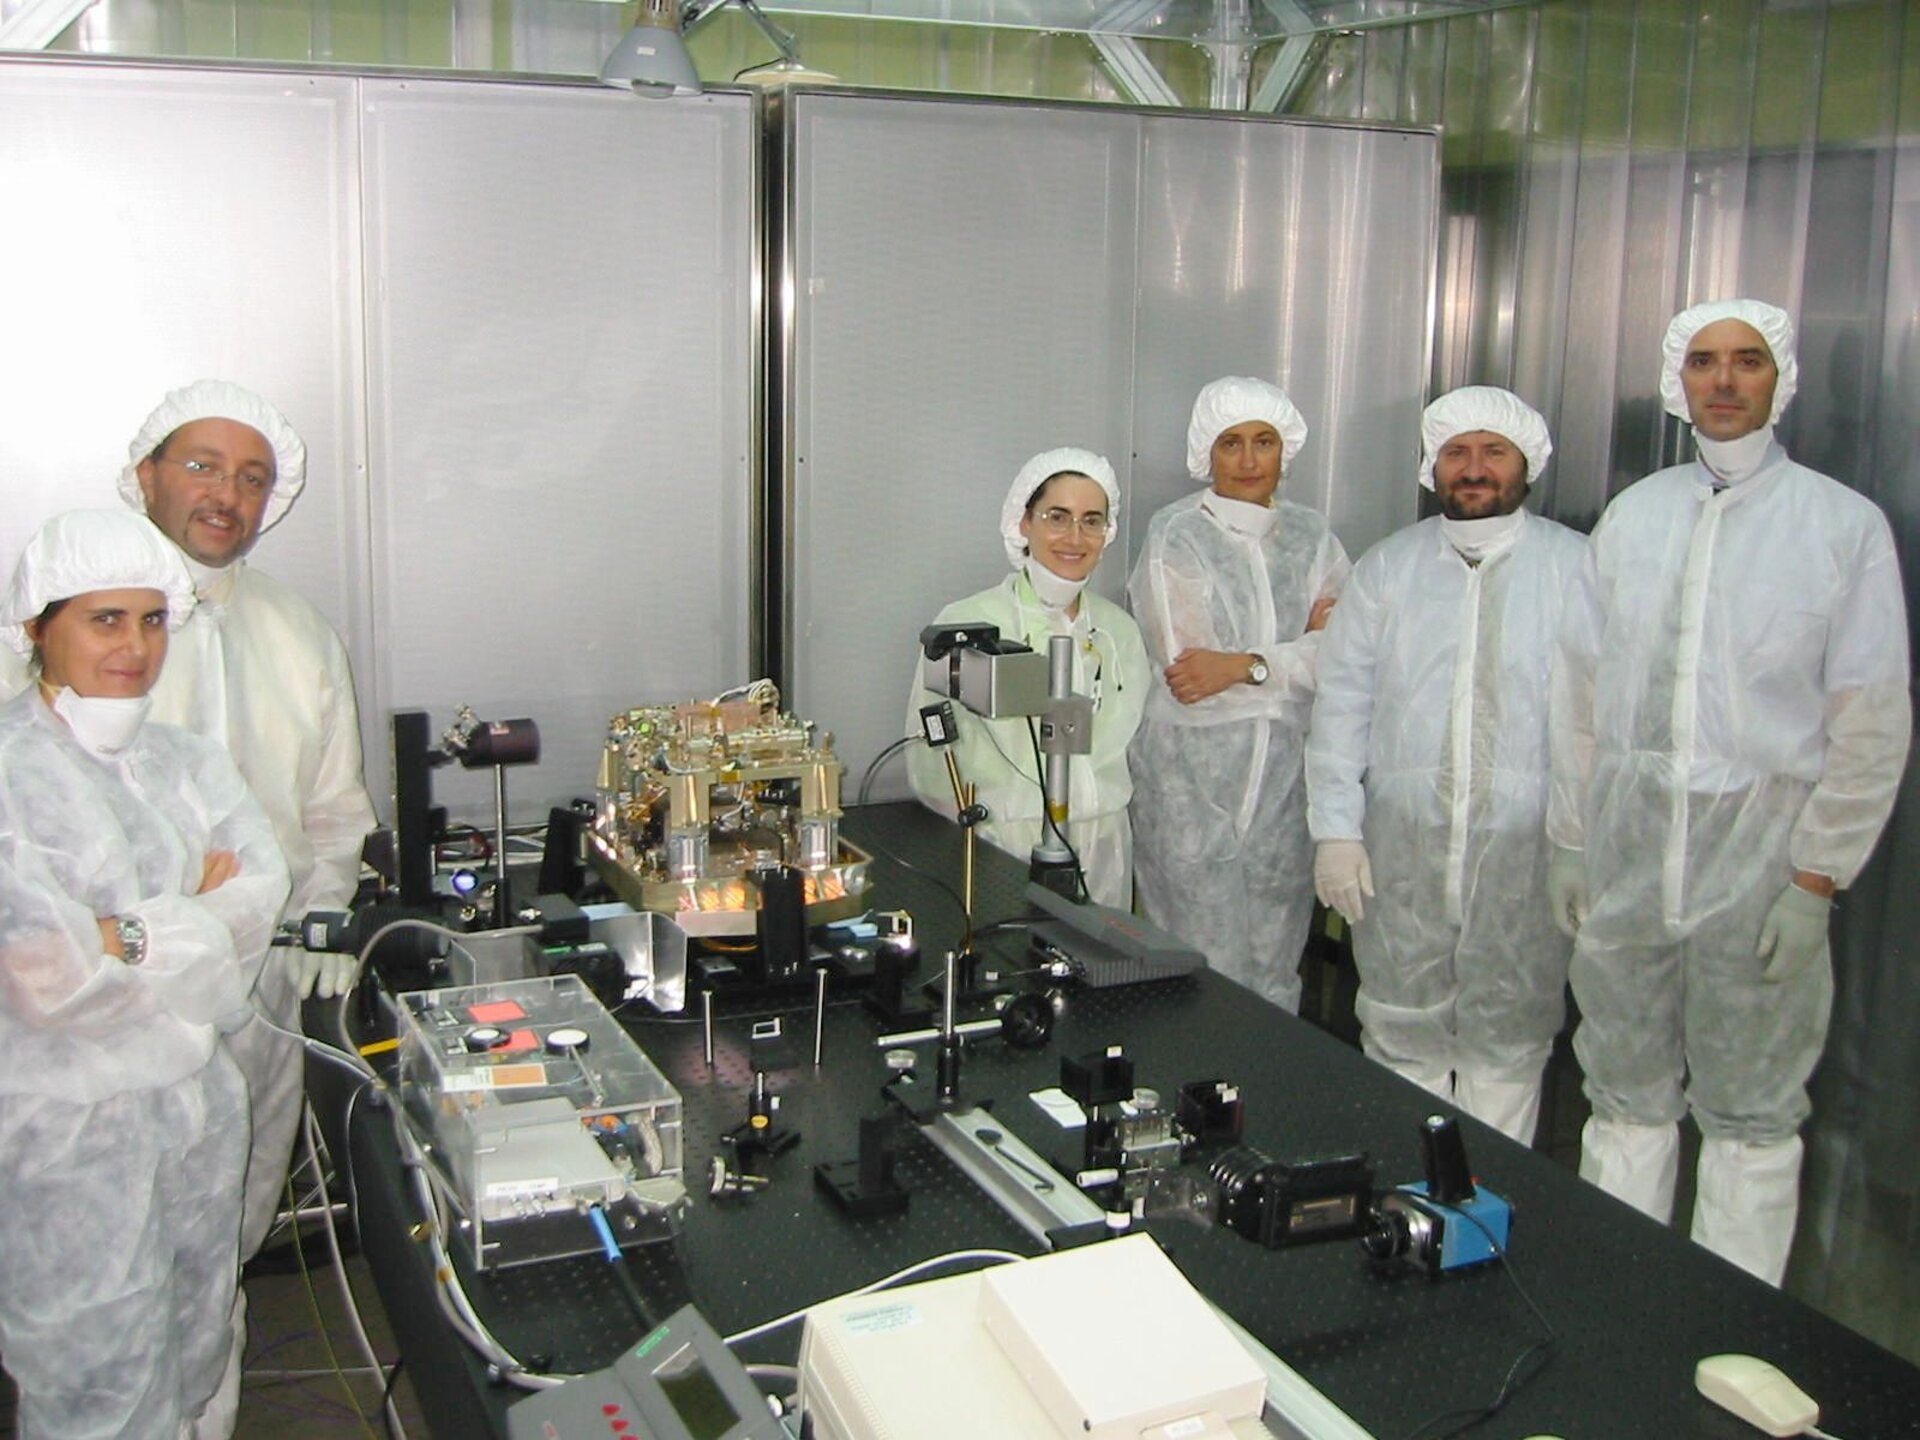 The proud laser assembly Galileo Avionica test team